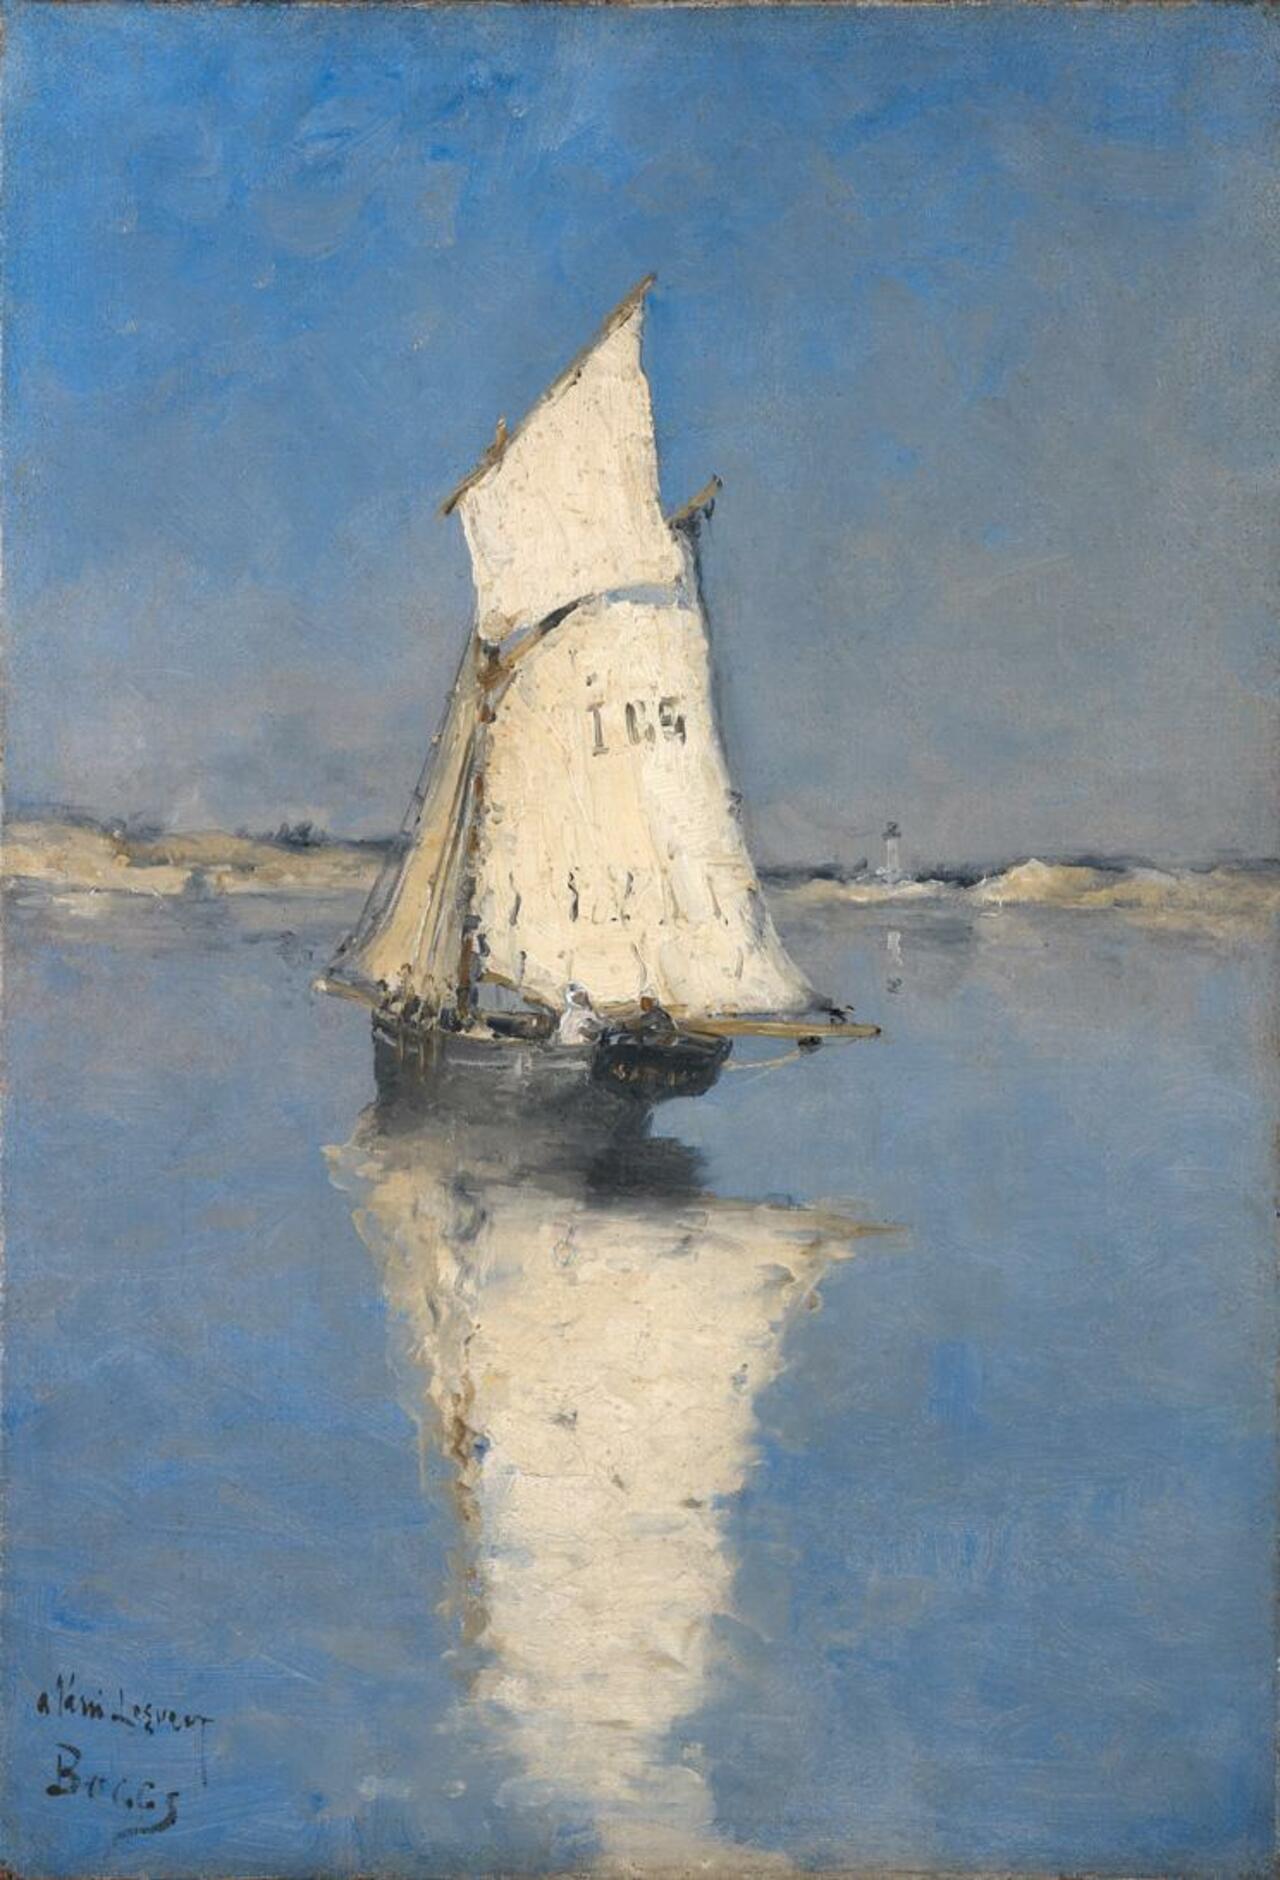 'Nothing-absolutely nothing-half so much worth doing as messing about in boats...' We quite agree! #FrankBoggs #art http://t.co/p0a05dImIb